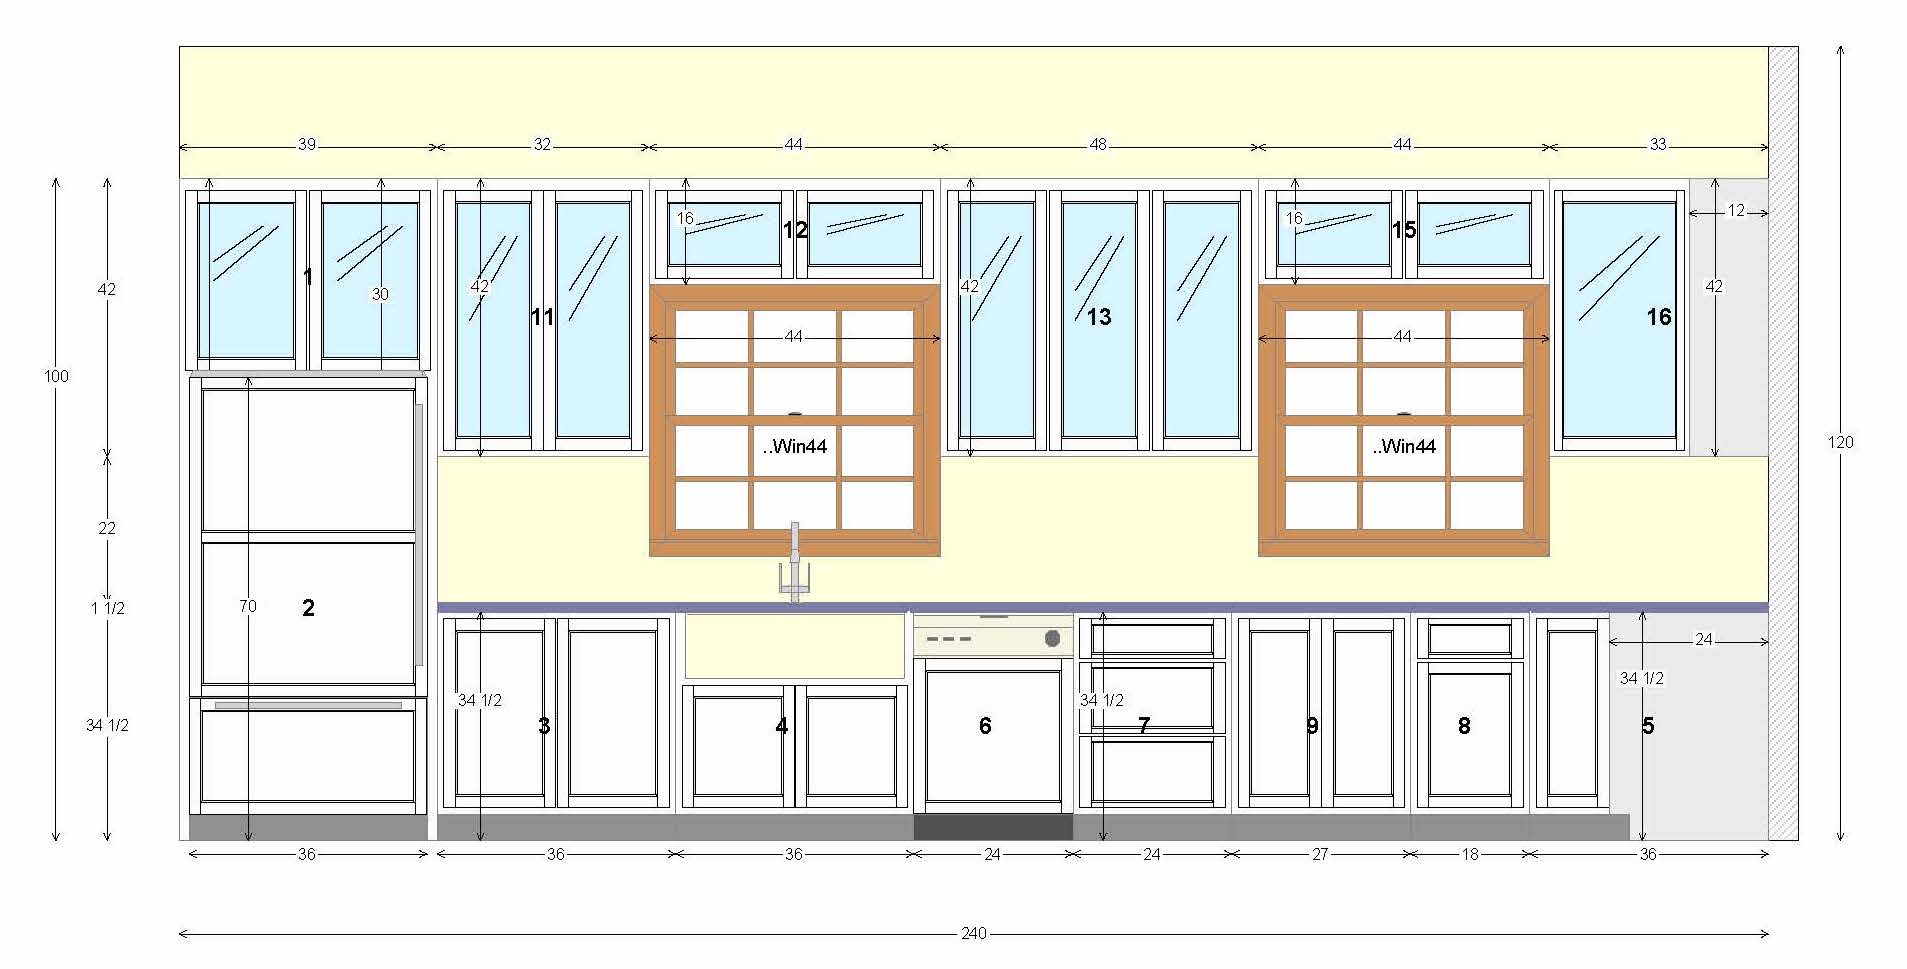 The long side of an L shaped kitchen layout design.